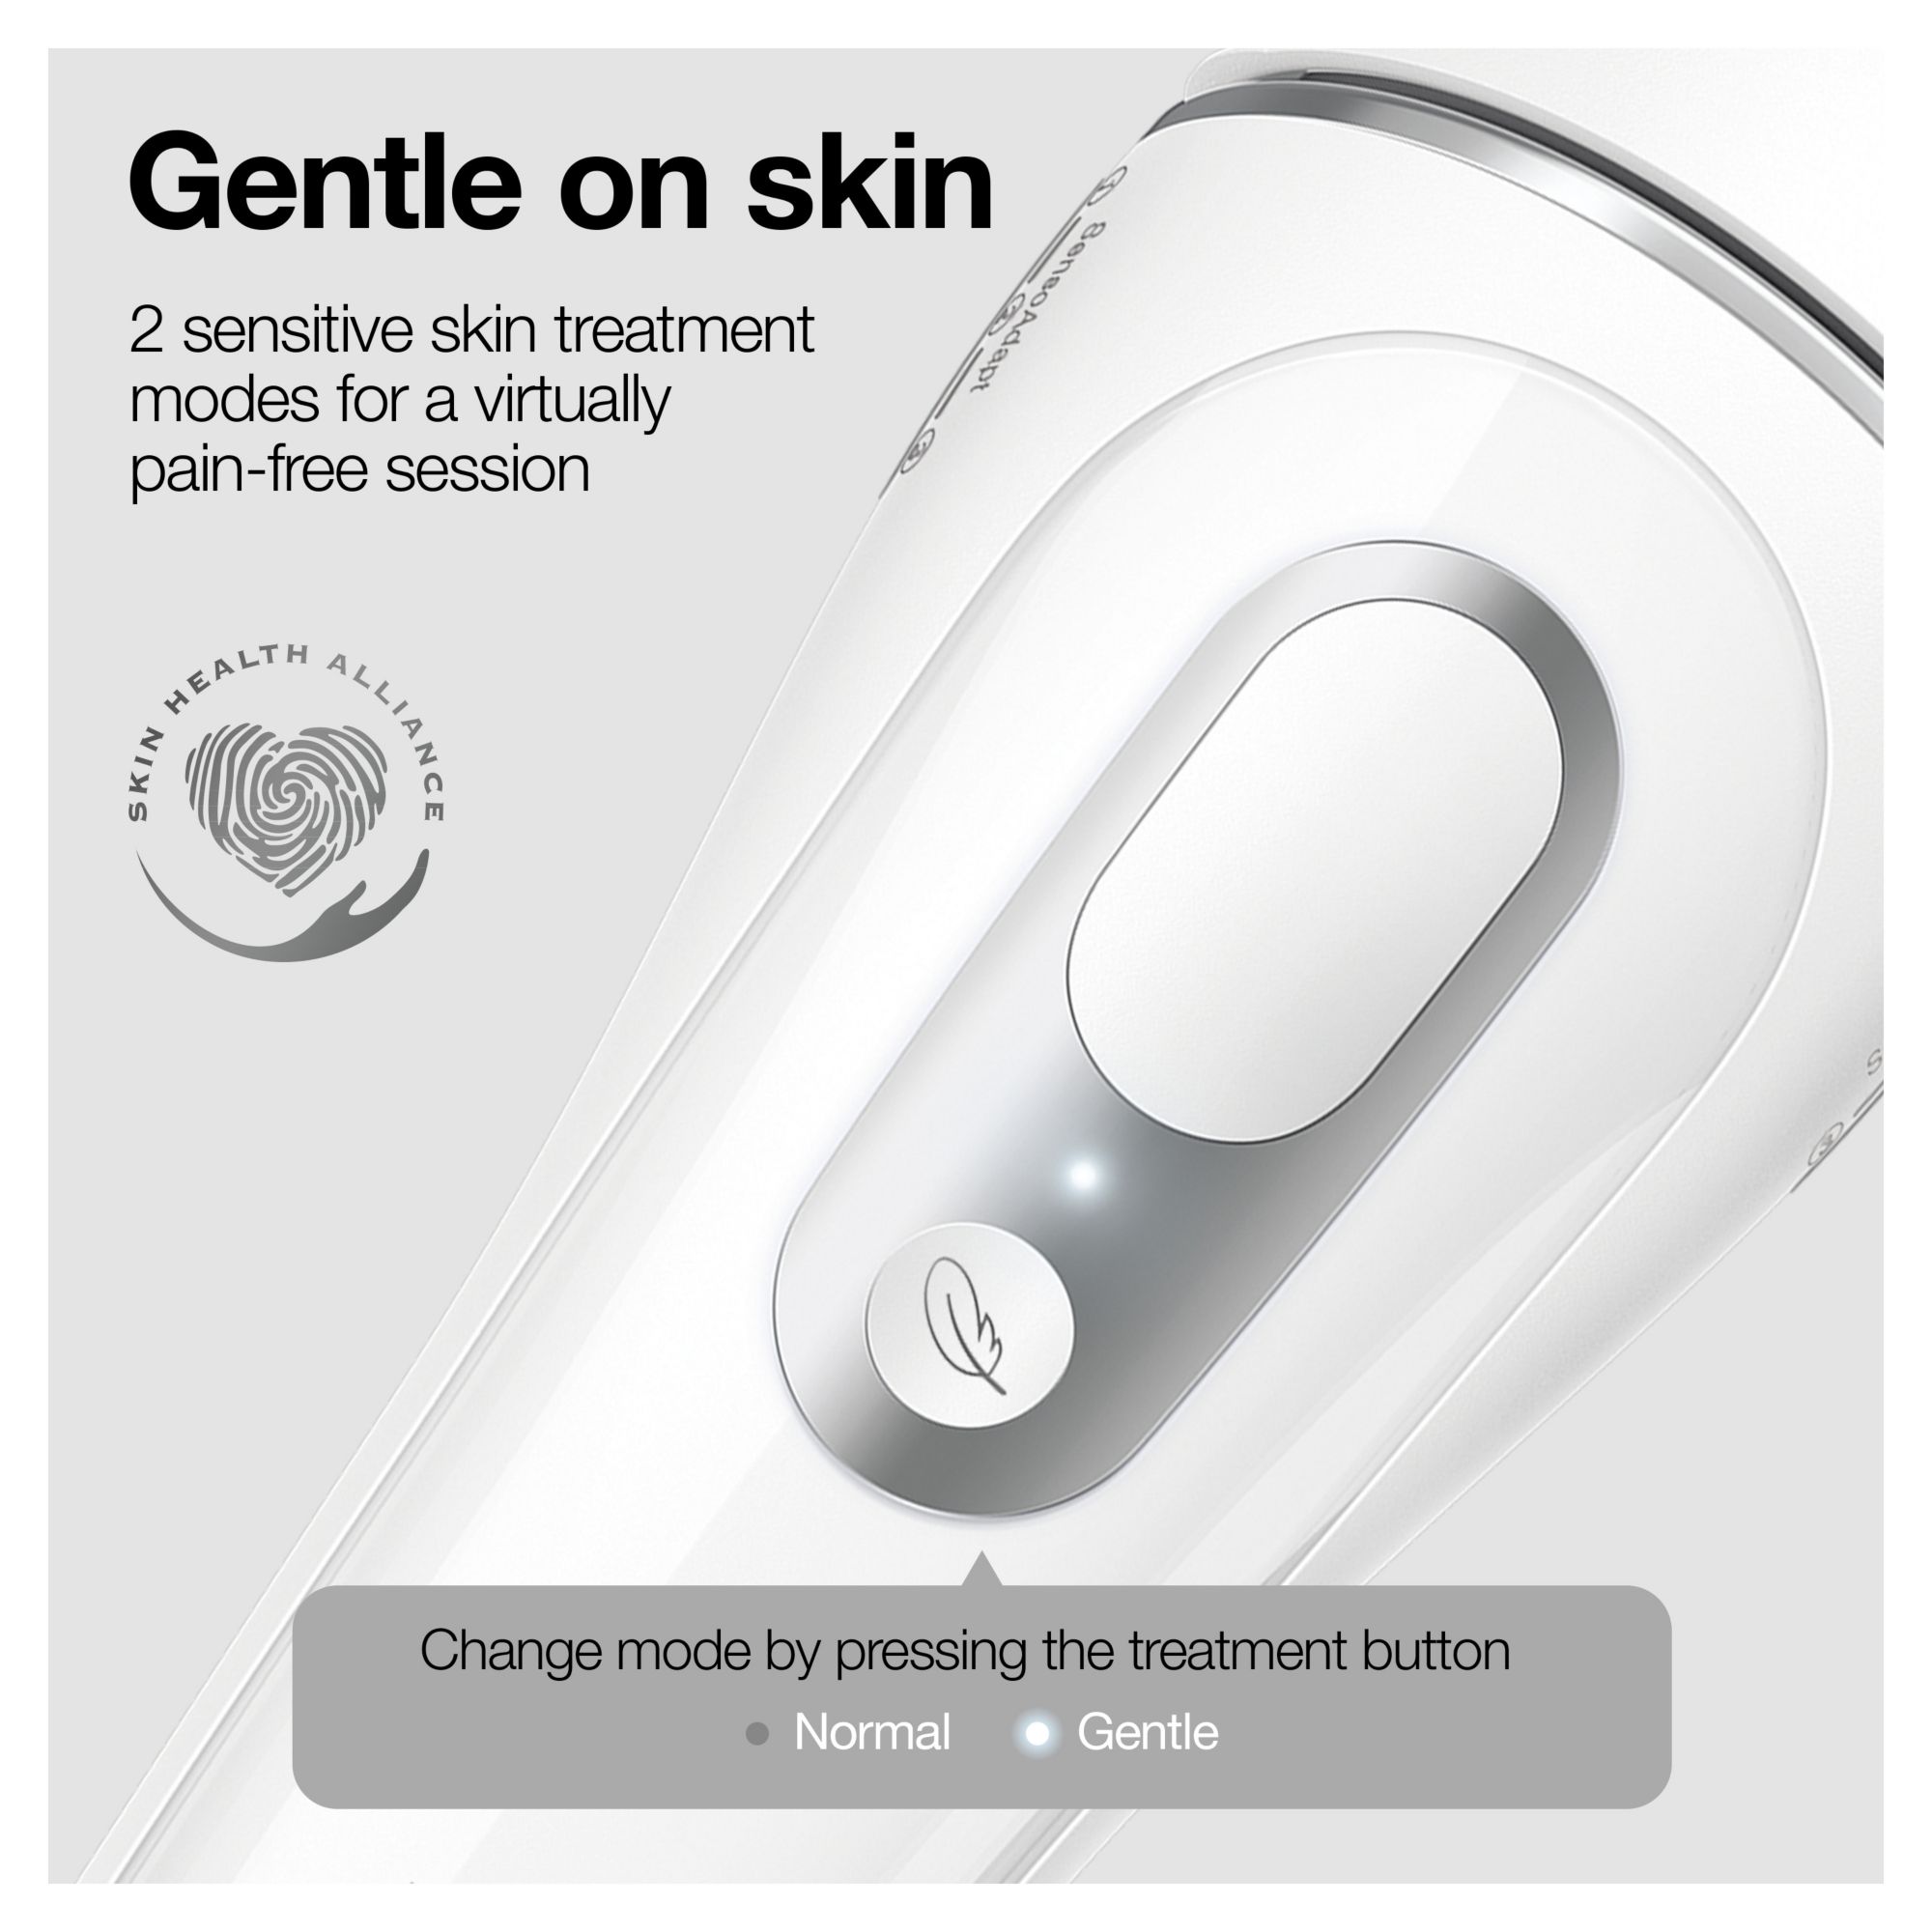 Braun Silk Expert Pro 3 IPL At-Home Hair Removal System for Men & Women |  BJ\'s Wholesale Club